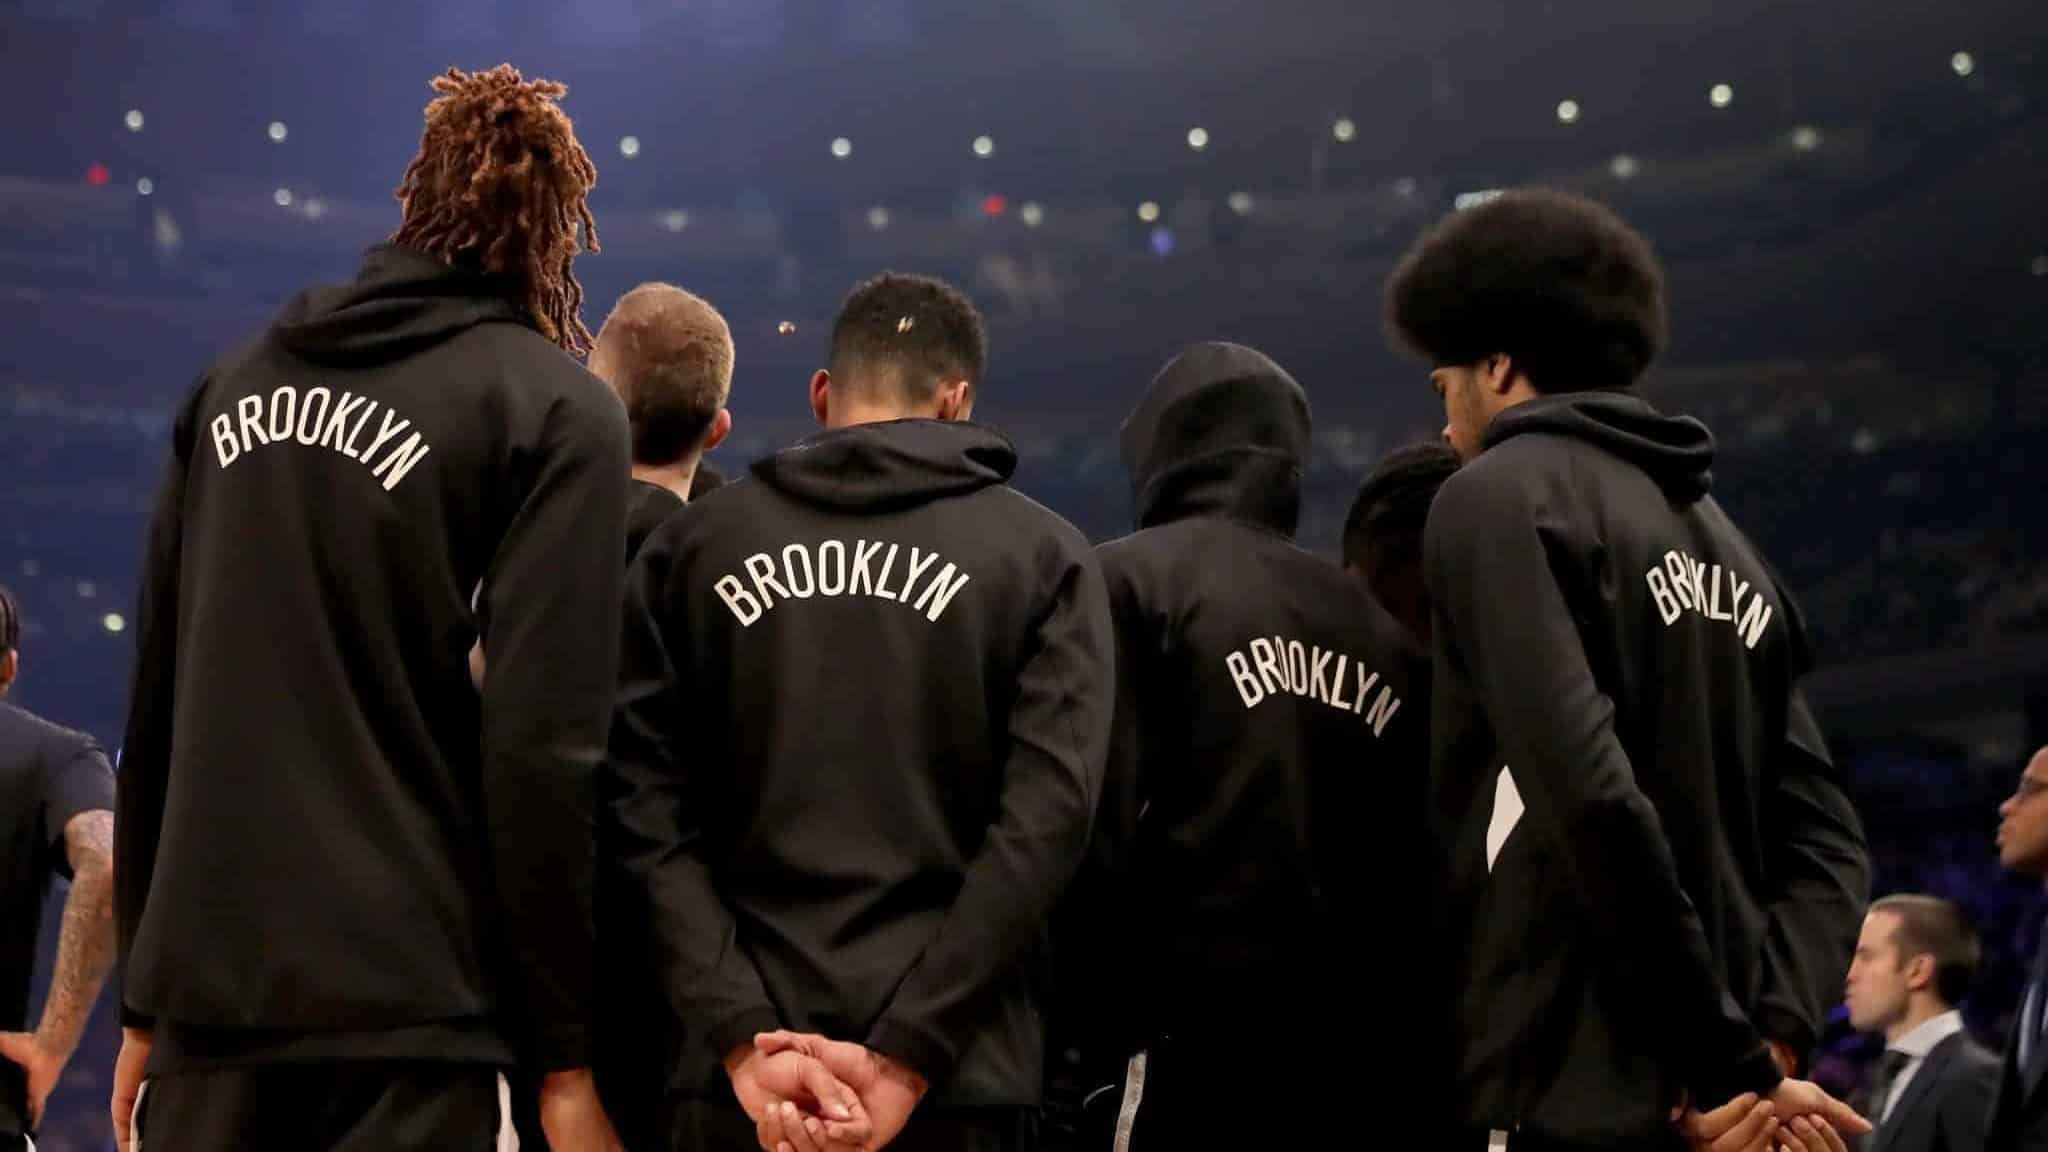 NEW YORK, NEW YORK - JANUARY 26: The Brooklyn Nets stands together before the opening tipoff against the New York Knicks at Madison Square Garden on January 26, 2020 in New York City.